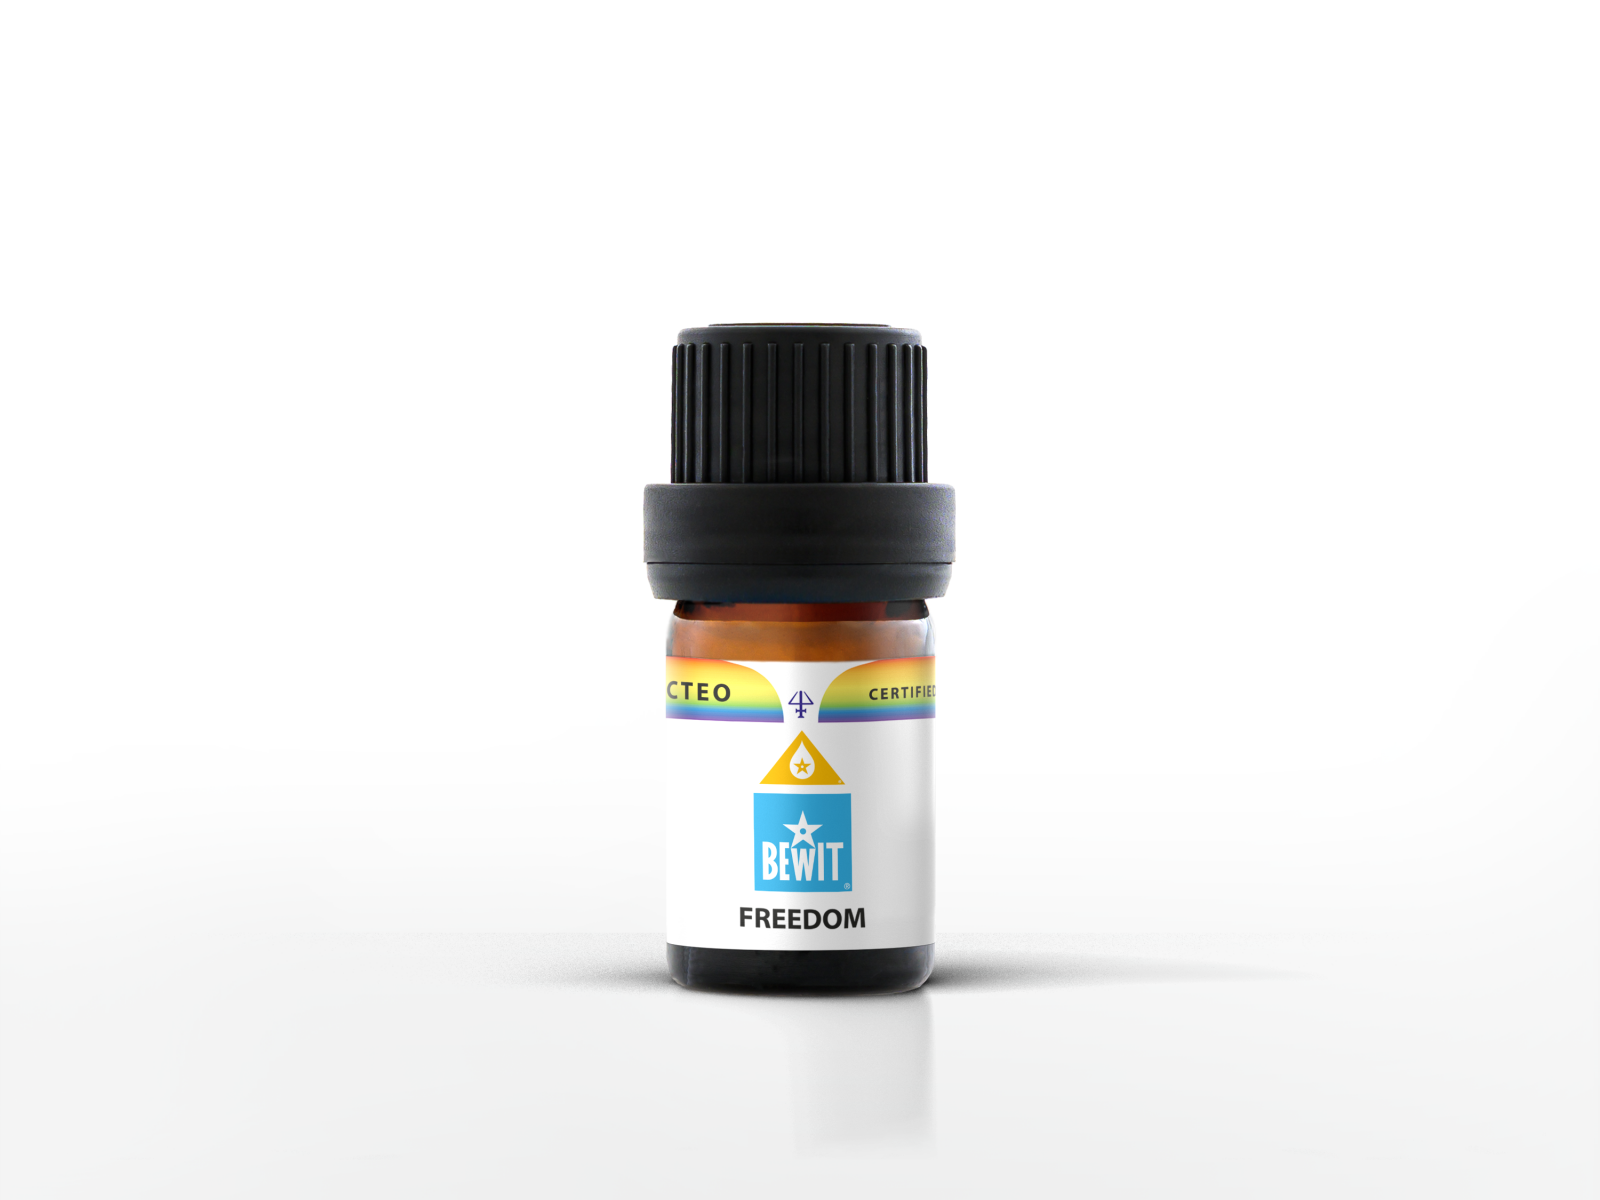 BEWIT FREEDOM - A unique blend of essential oils - 2